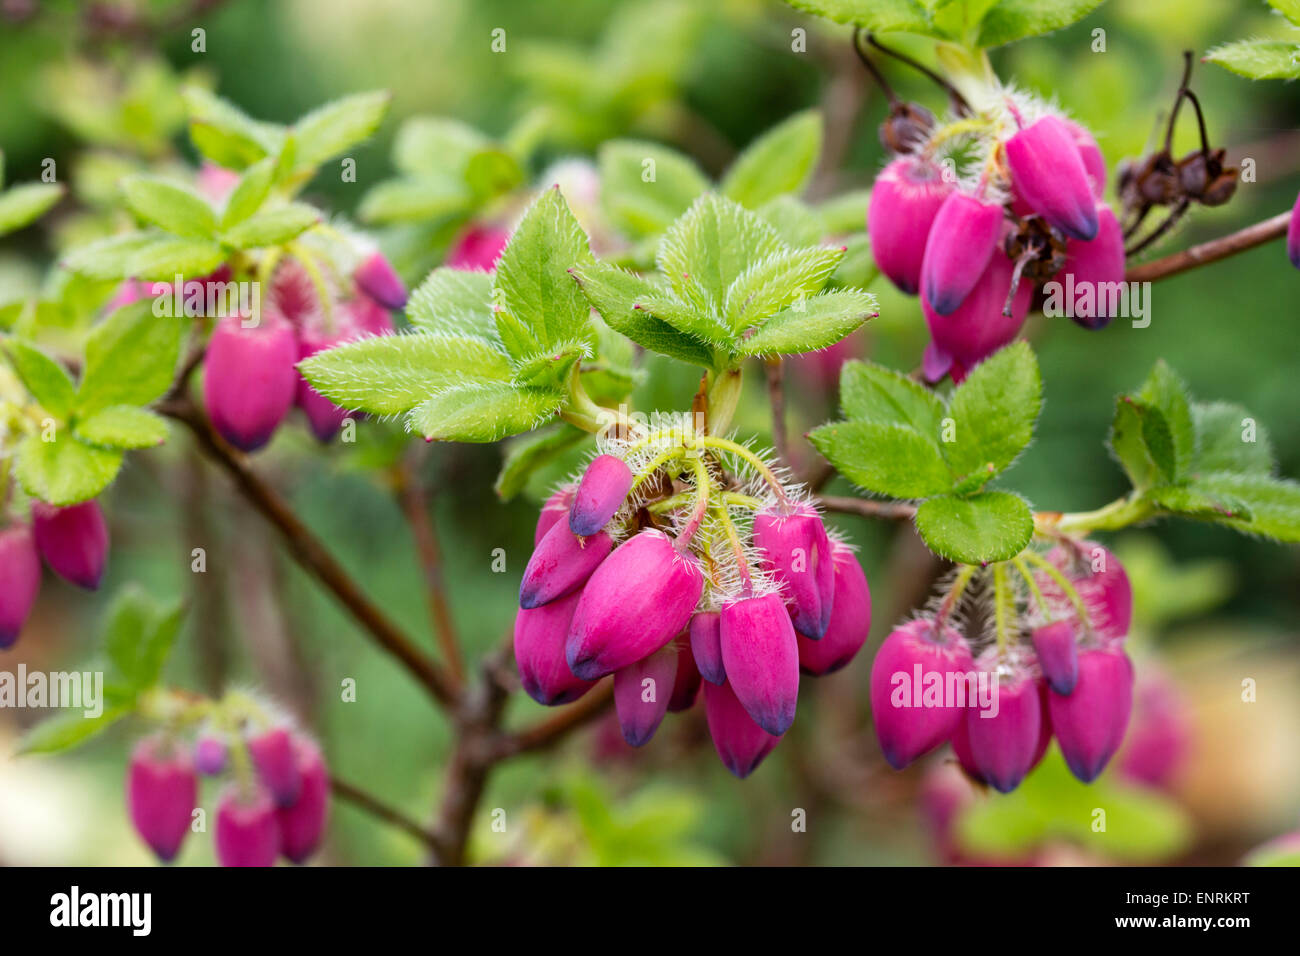 Late spring flowers of the small evergreen shrub, Rhododendron benhallii 'Plum Drops' Stock Photo